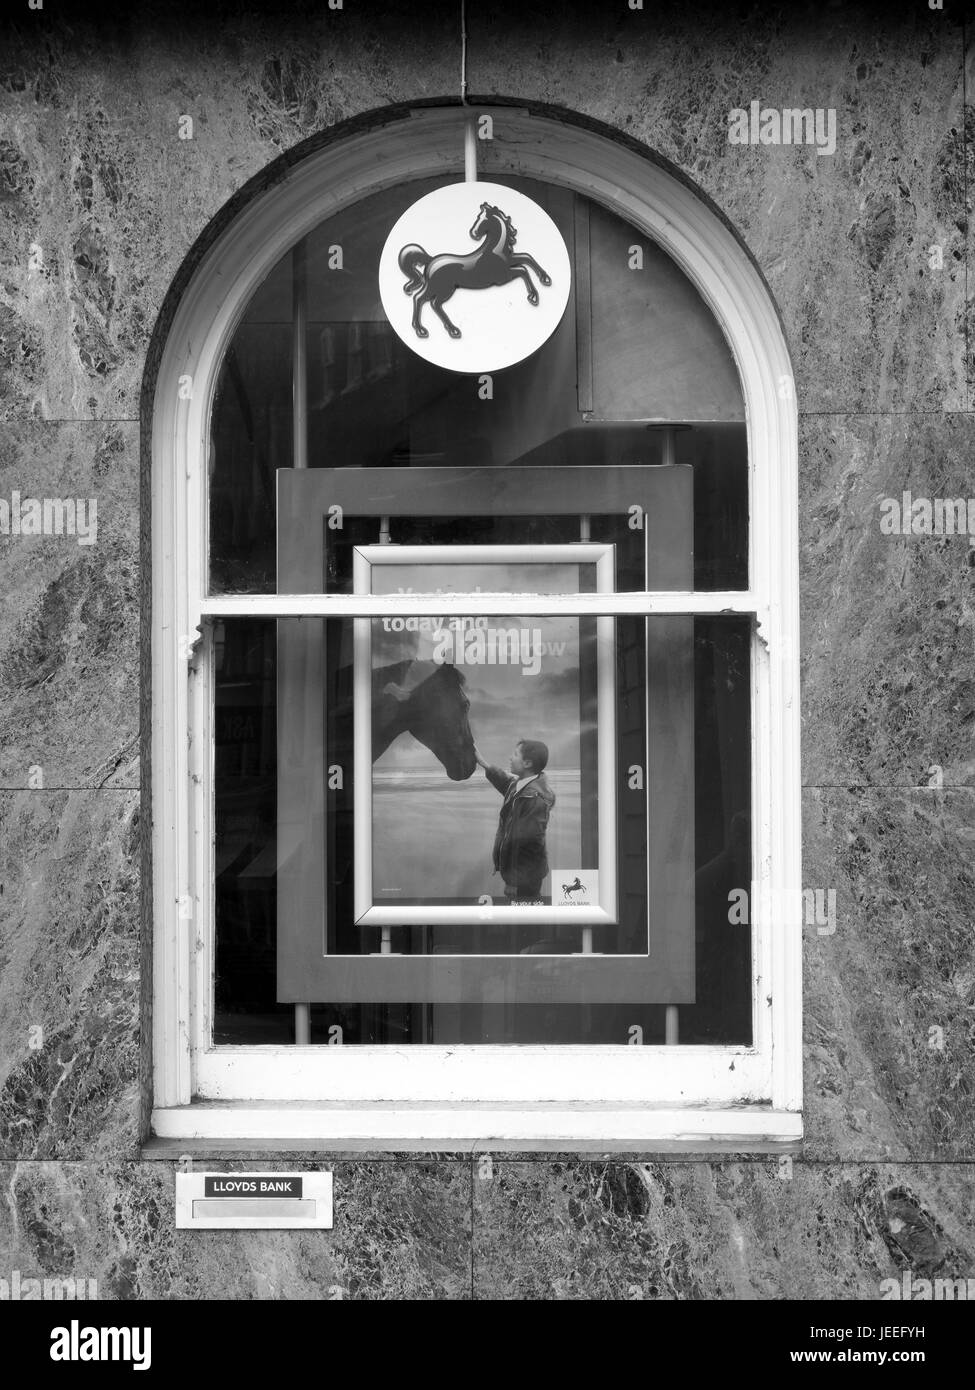 Lloyds bank sign and advertising poster in window, British retail and commercial bank, originally founded in 1765 Stock Photo